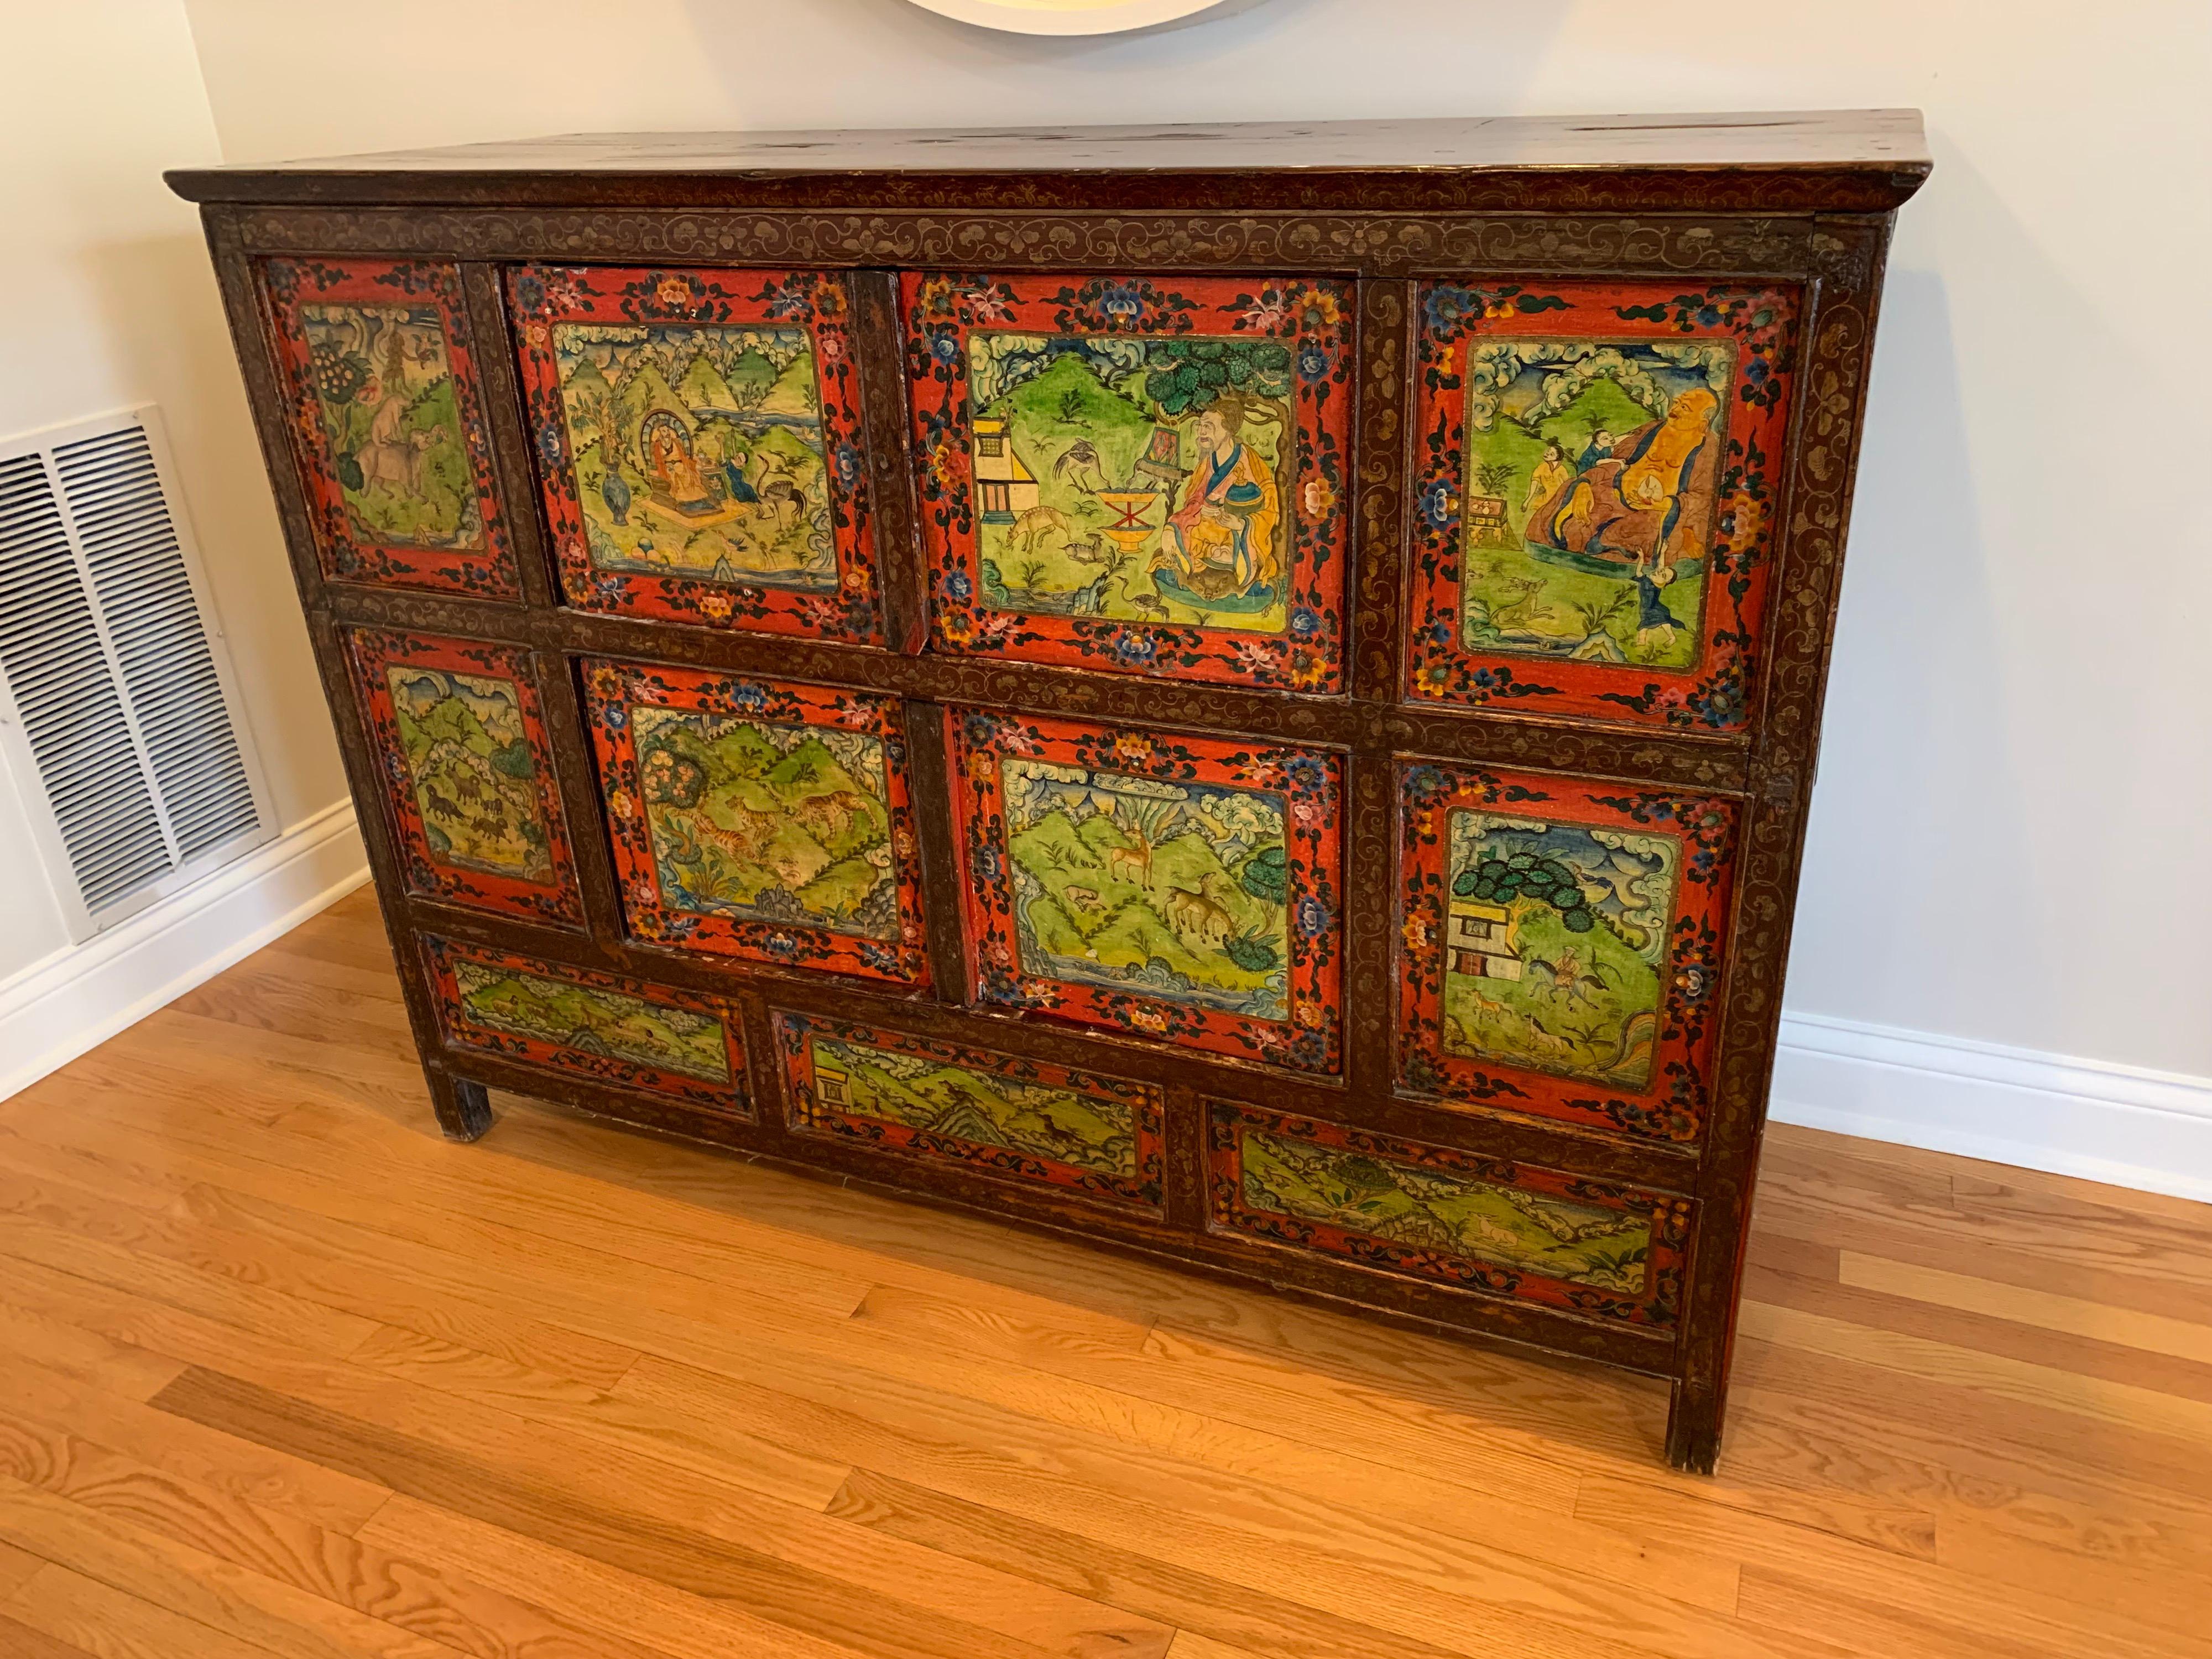 One of a kind piece
purchased for $5200 from Golden Triangle, each panel is different and hand painted. four panels open for cabinet storage. Solid teak top with rustic impressions. Fabulous and one of a kind piece measures: 60 x 23 x 42.